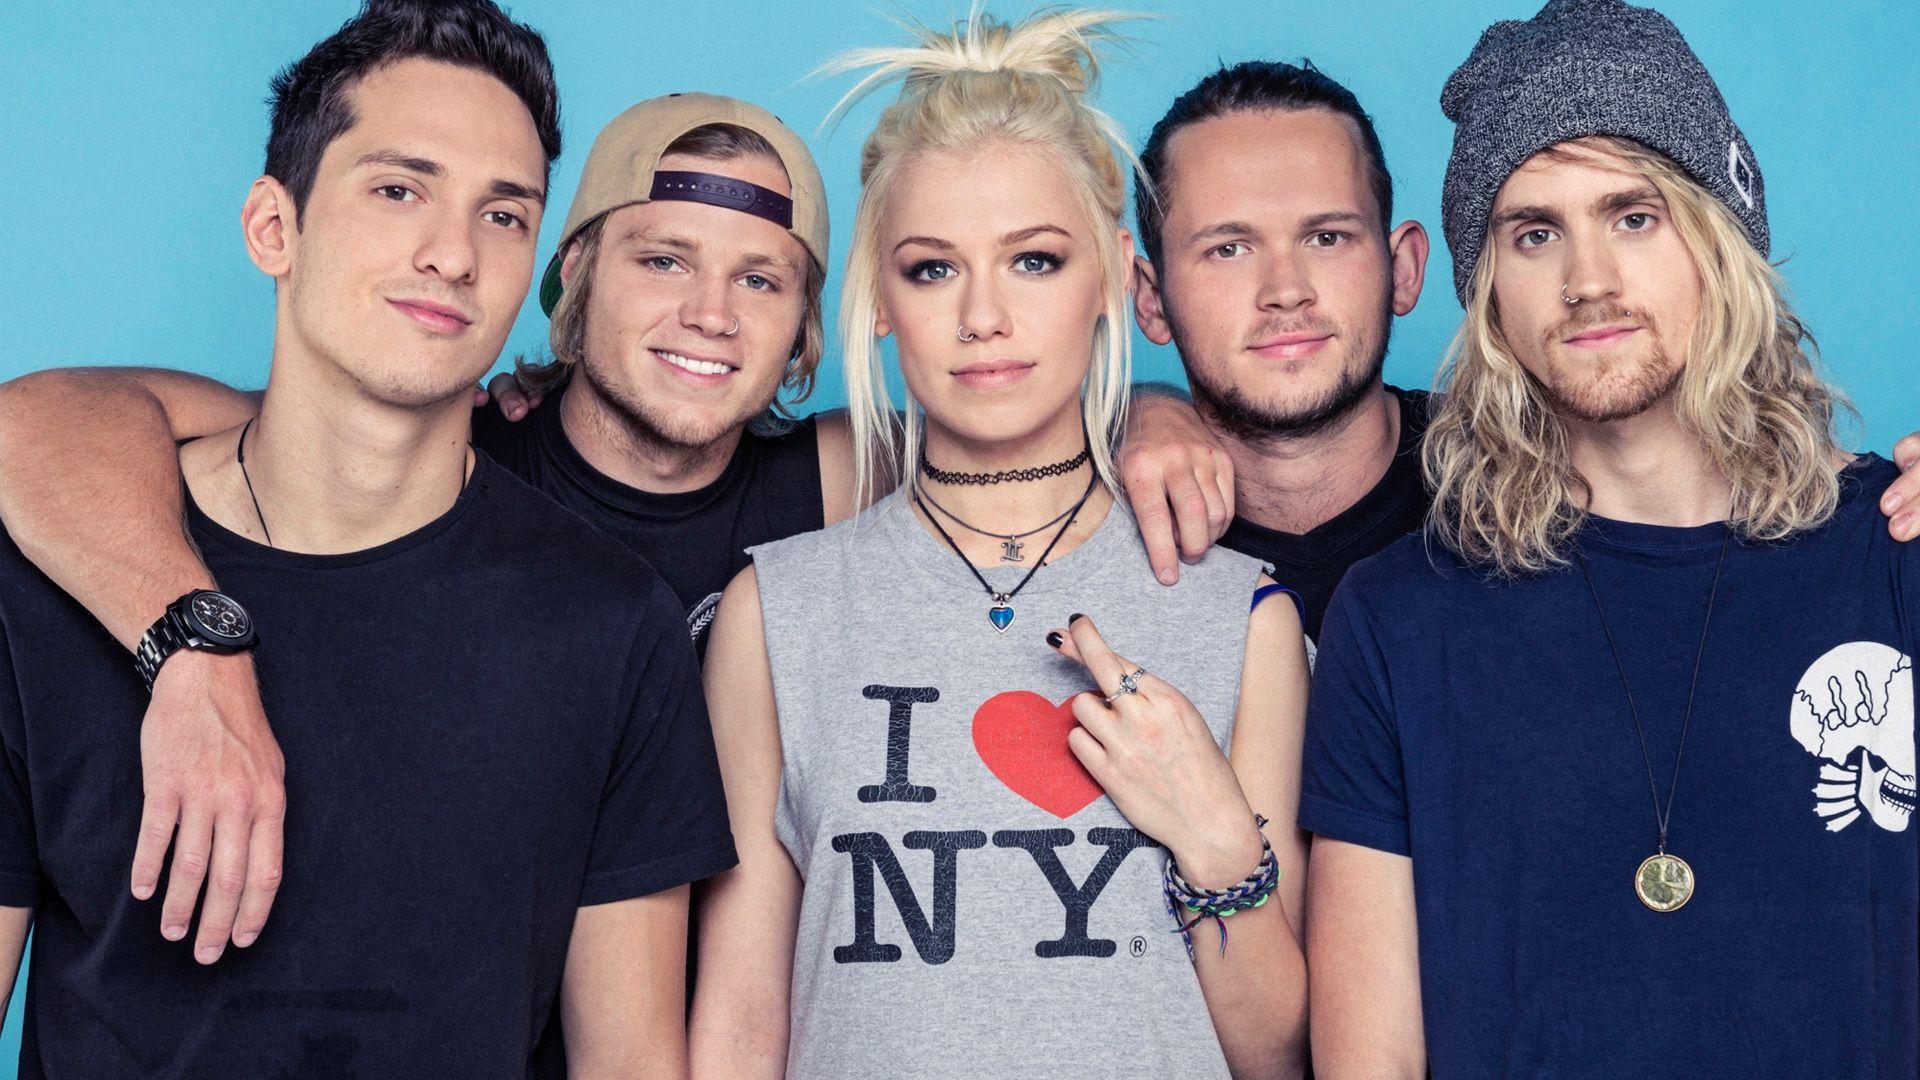 Tonight Alive Wallpapers Wallpaper Cave